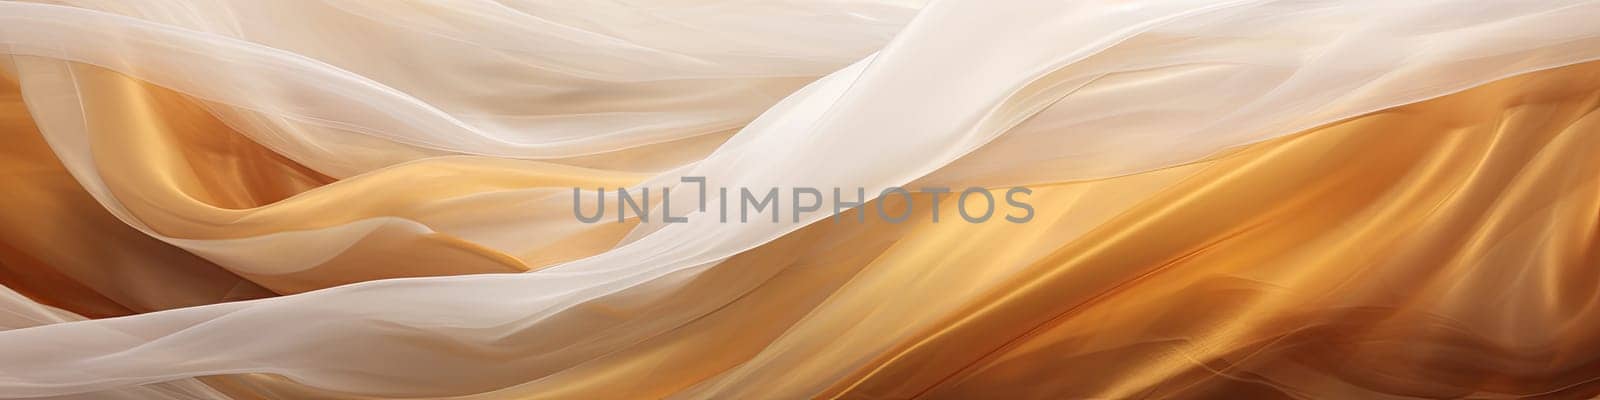 Banner of an abstract white and brown, gold textile transparent fabric as background or texture by Kadula